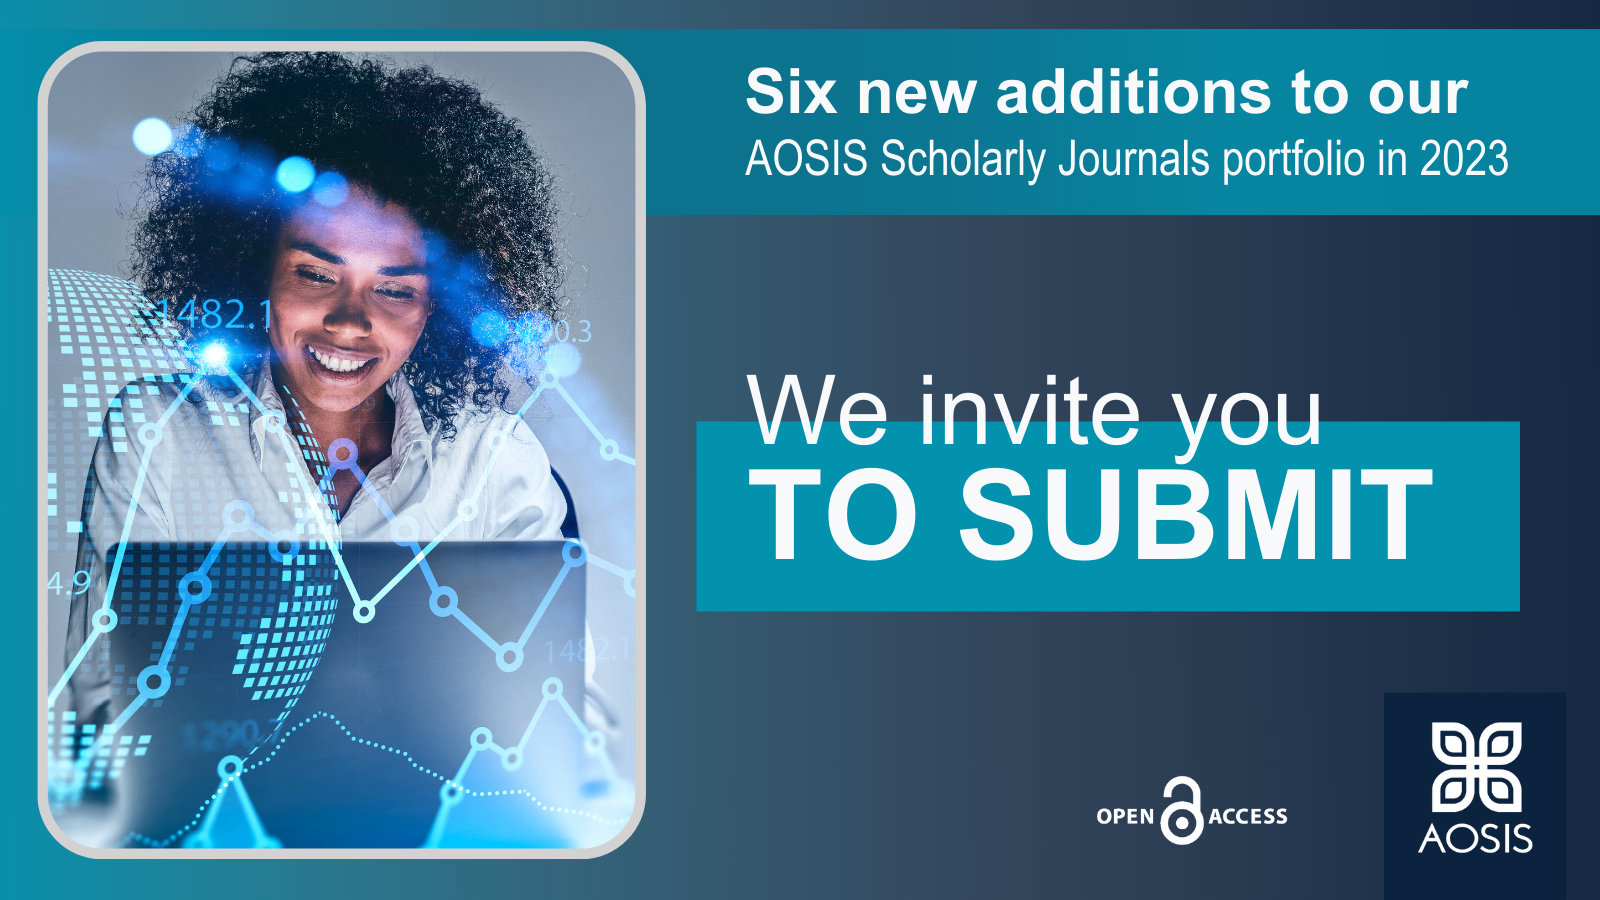 Six new additions to our AOSIS Scholarly Journals portfolio in 2023